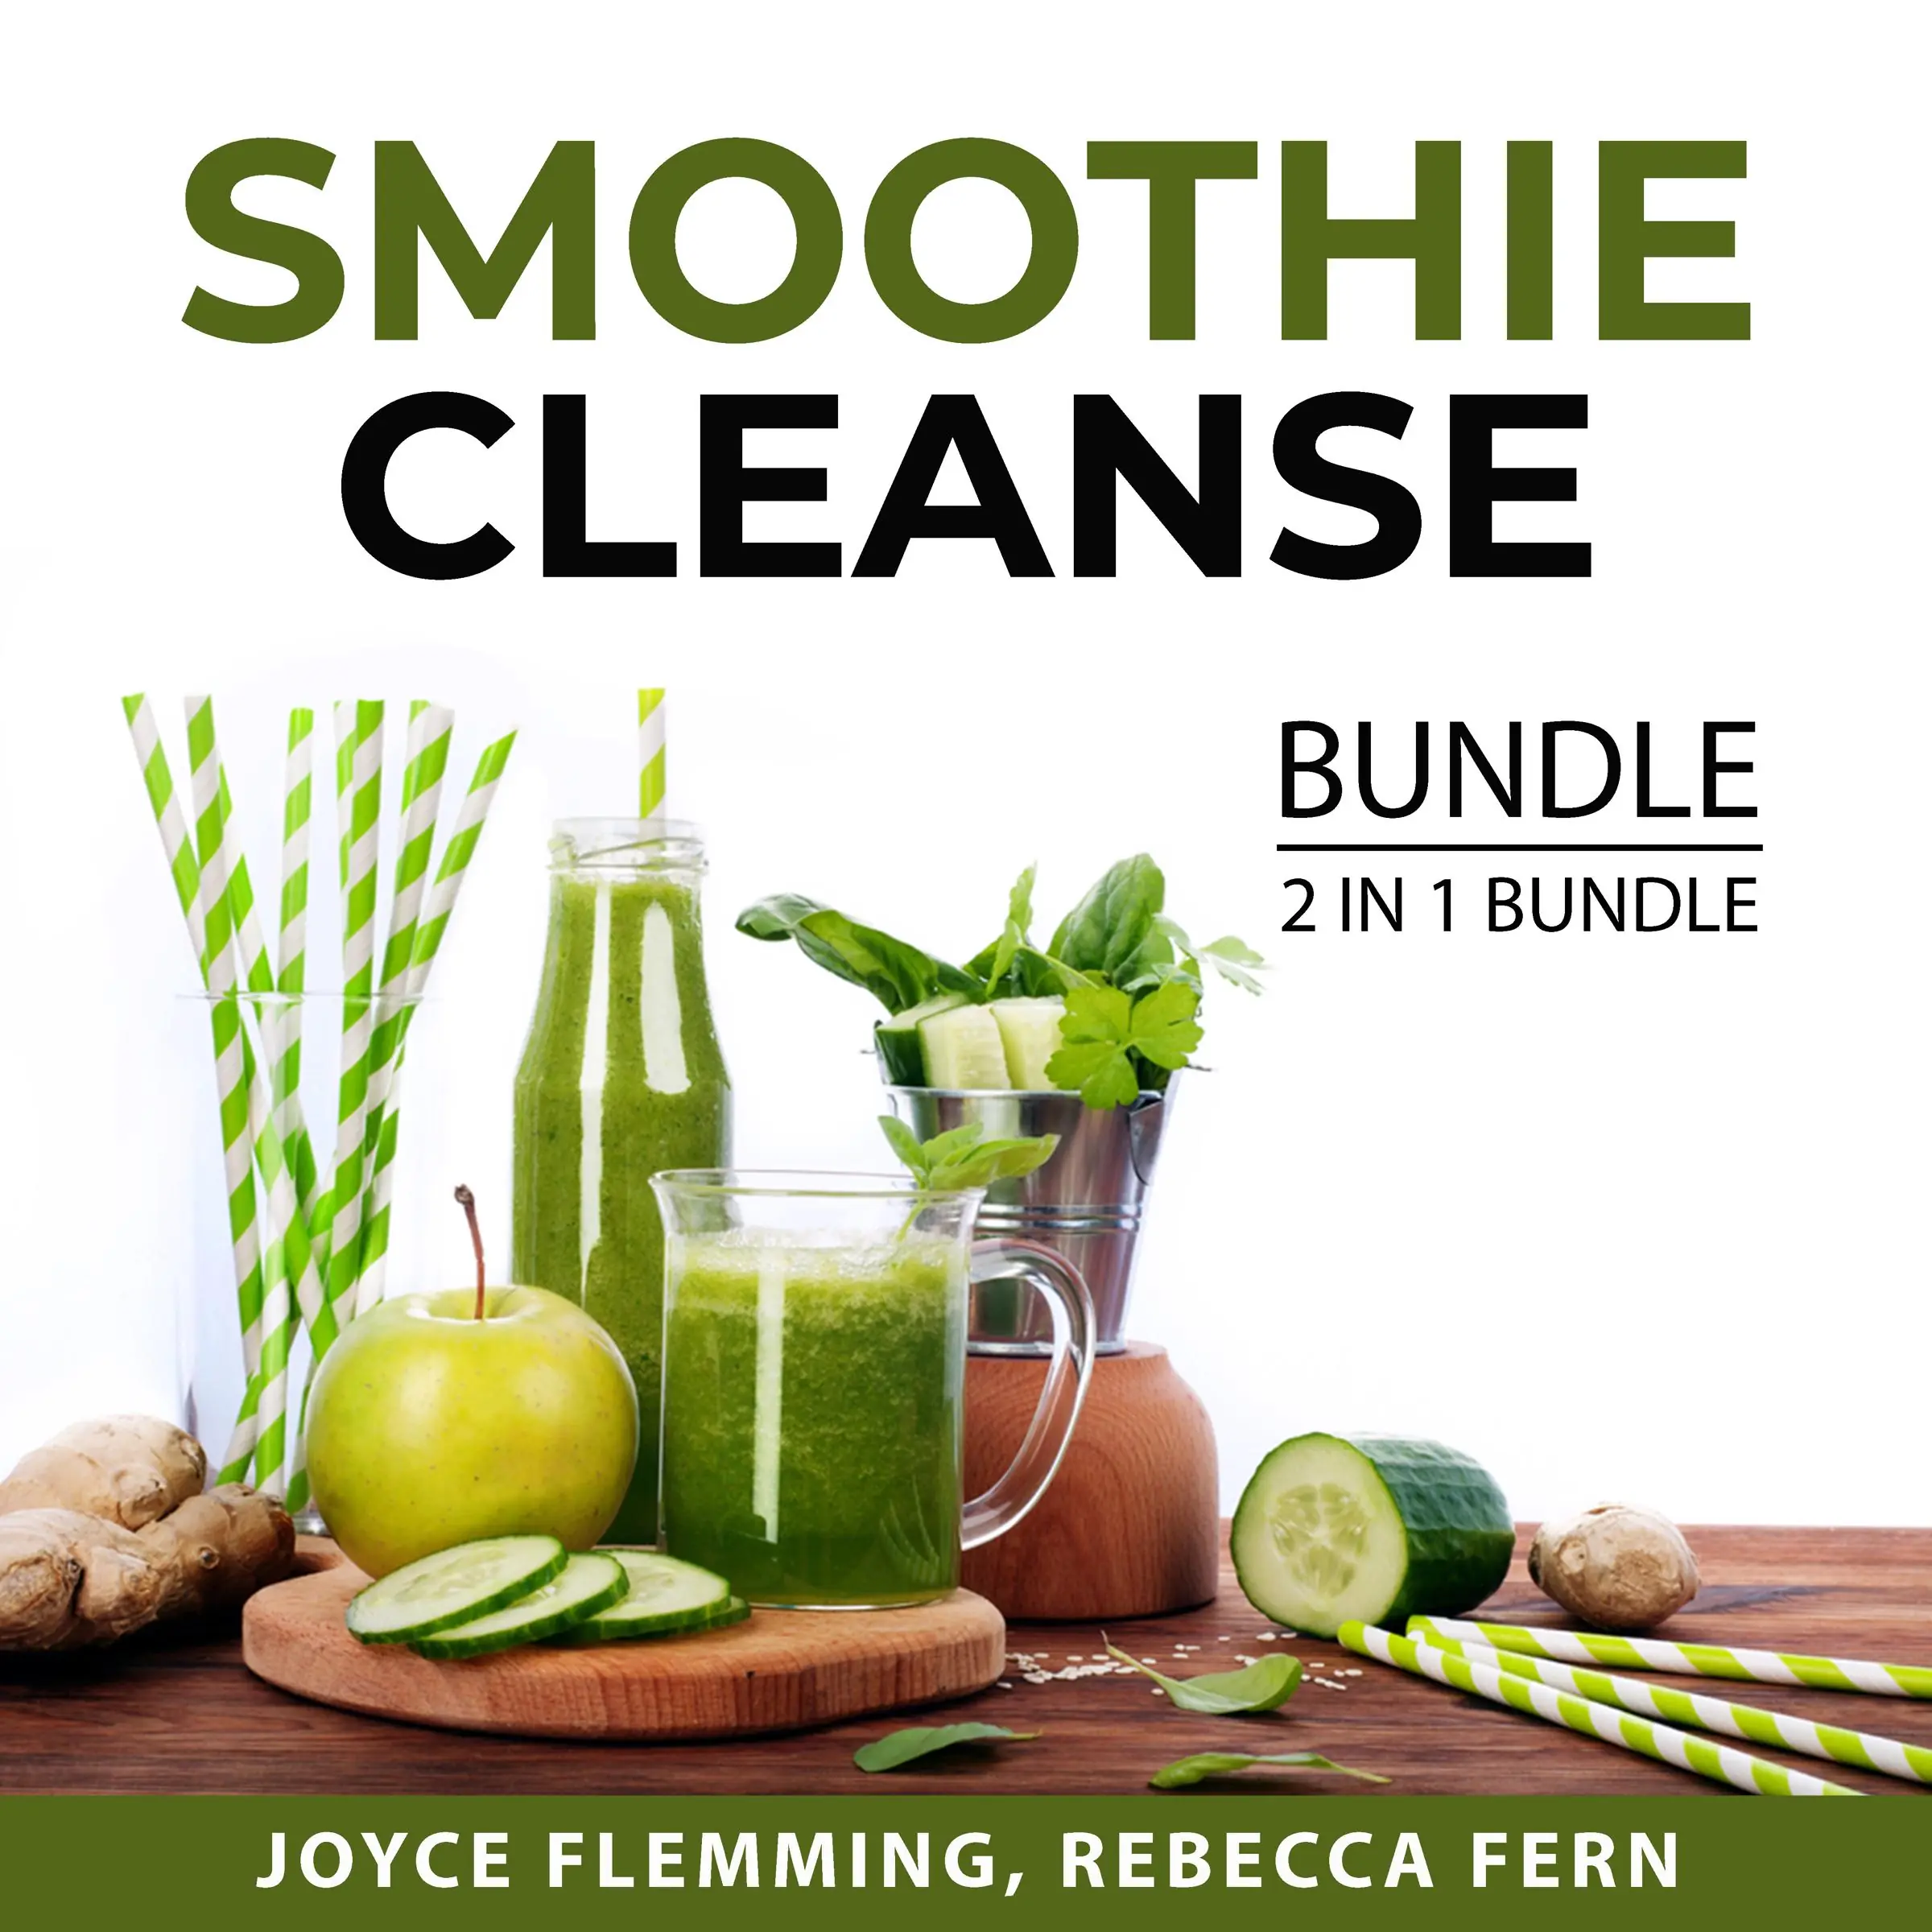 Smoothie Cleanse Bundle, 2 in 1 Bundle: Healthy Smoothie Bible and Cleanse To Heal Audiobook by and Rebecca Fern